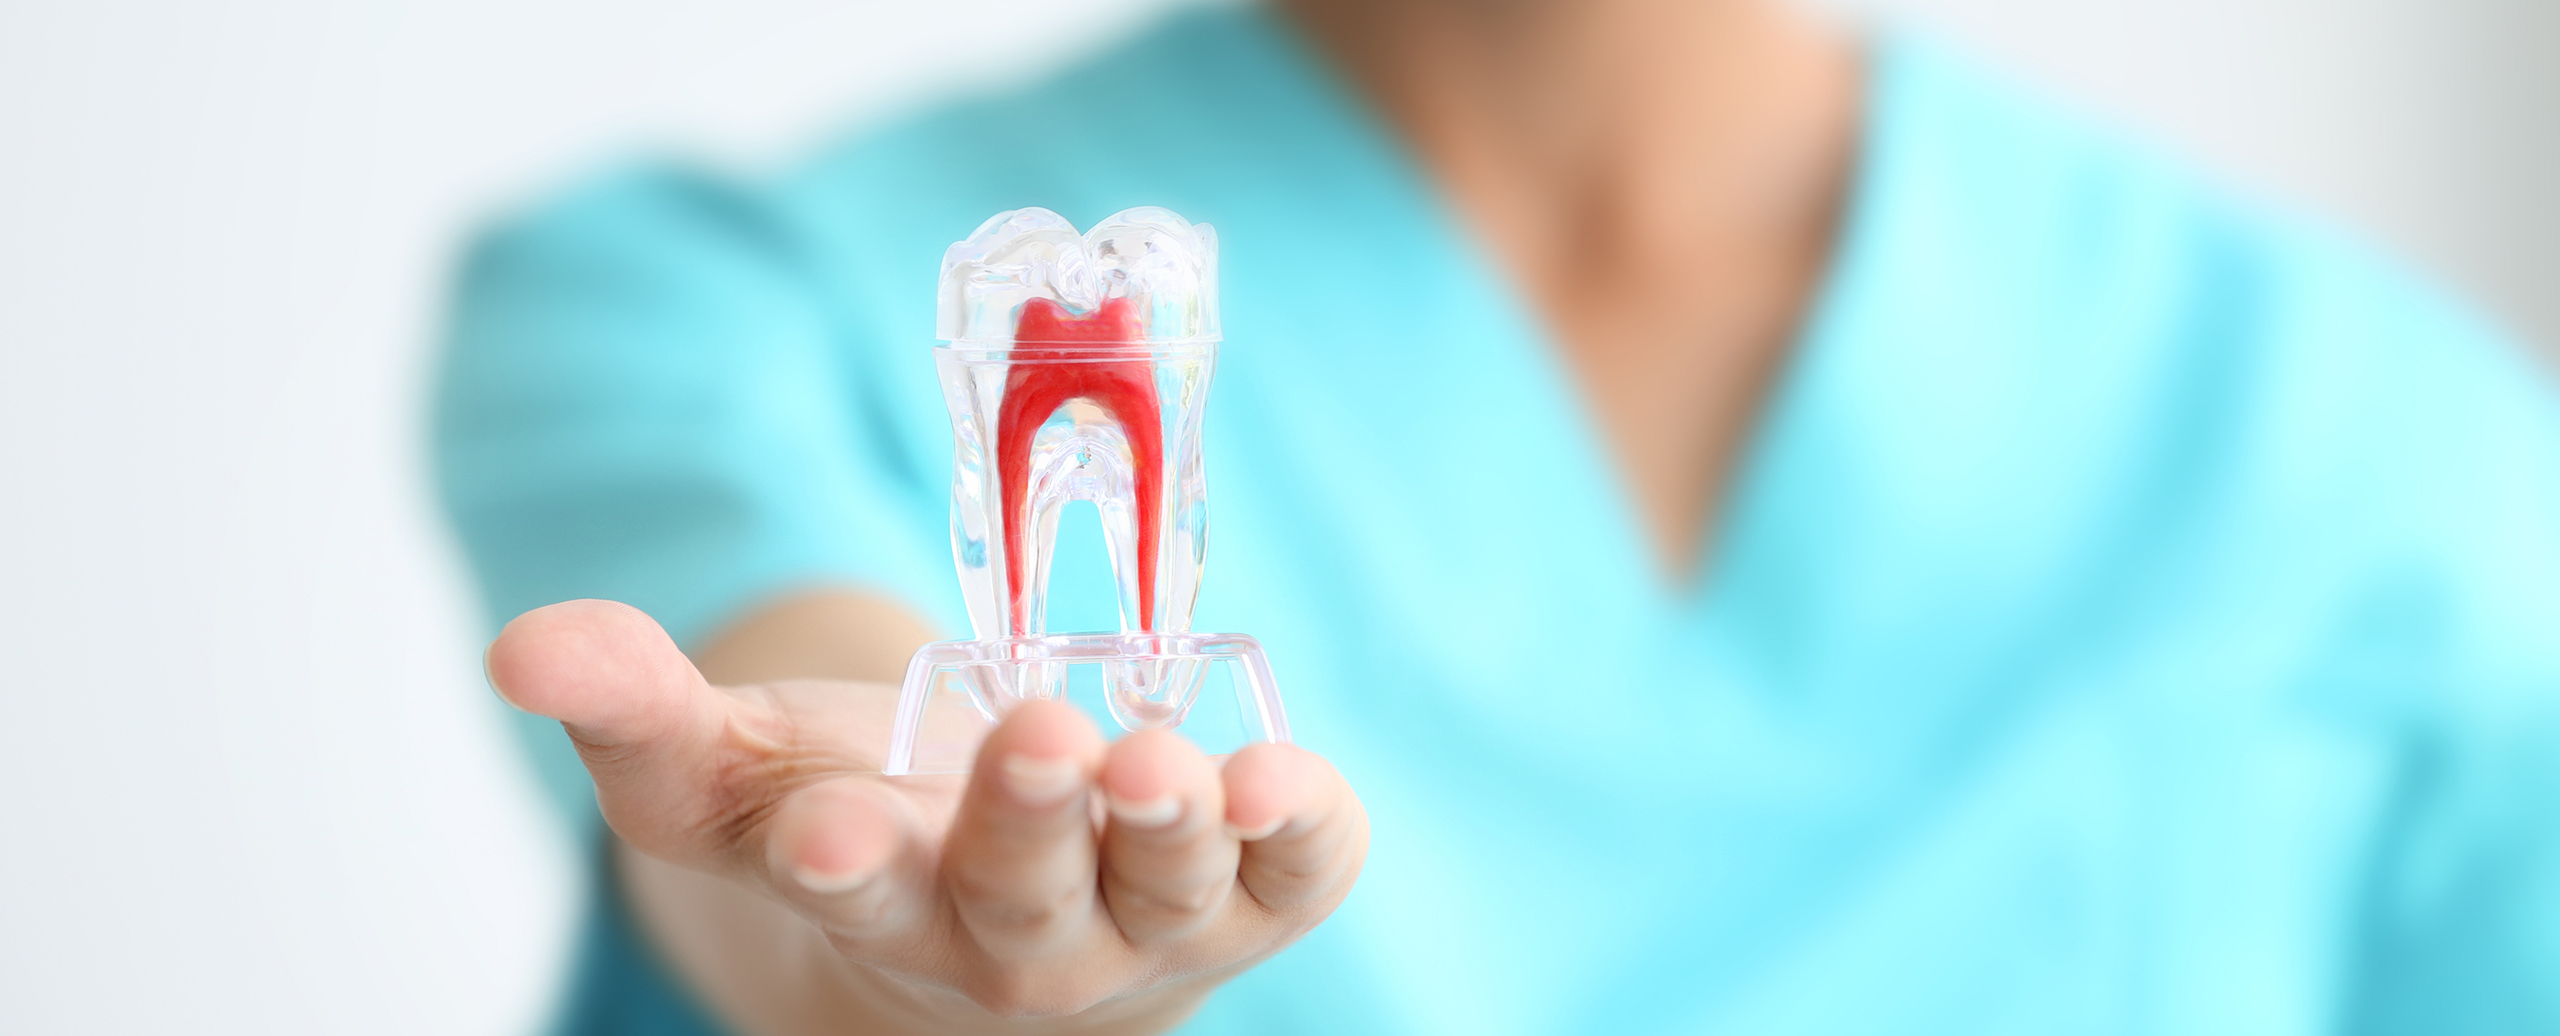 A fresh Approach to Dental Healthcare